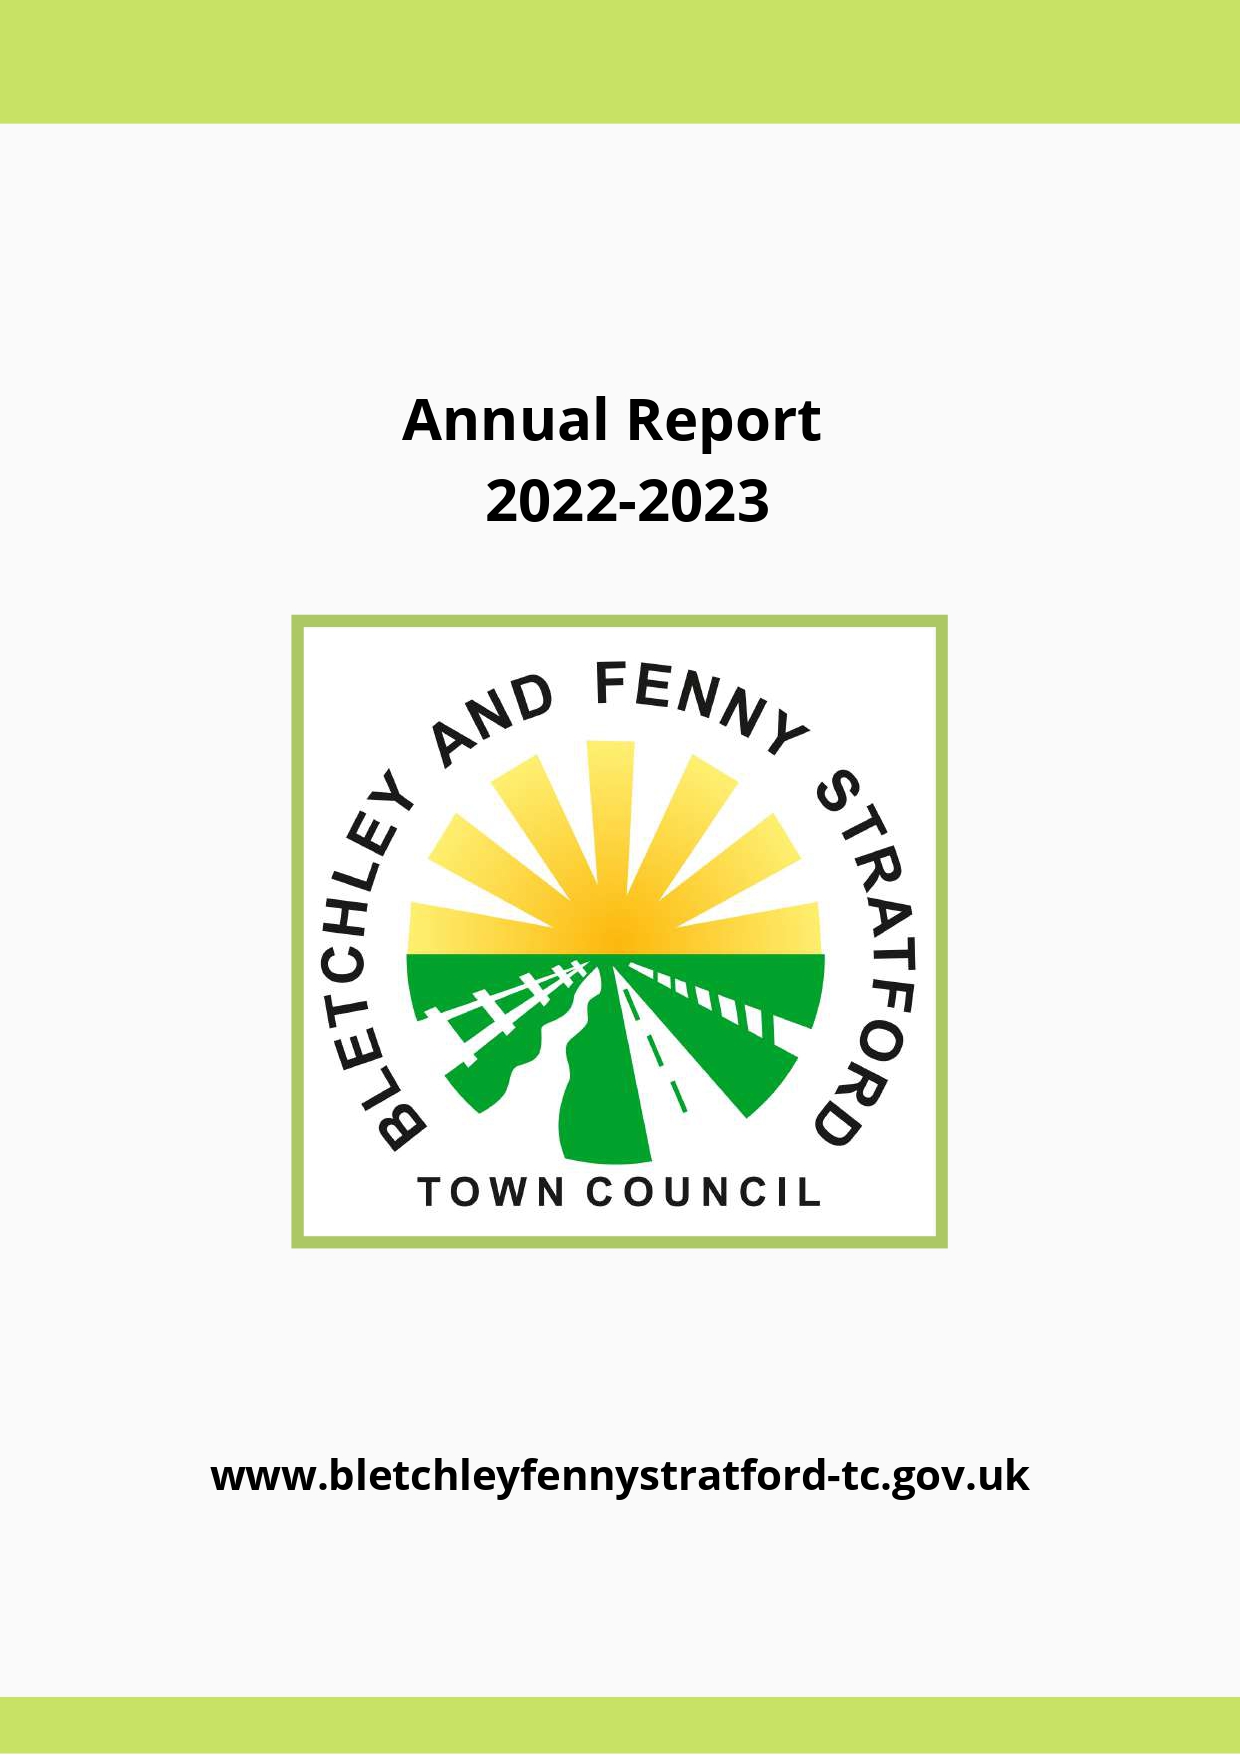 Image of Annual Report front page